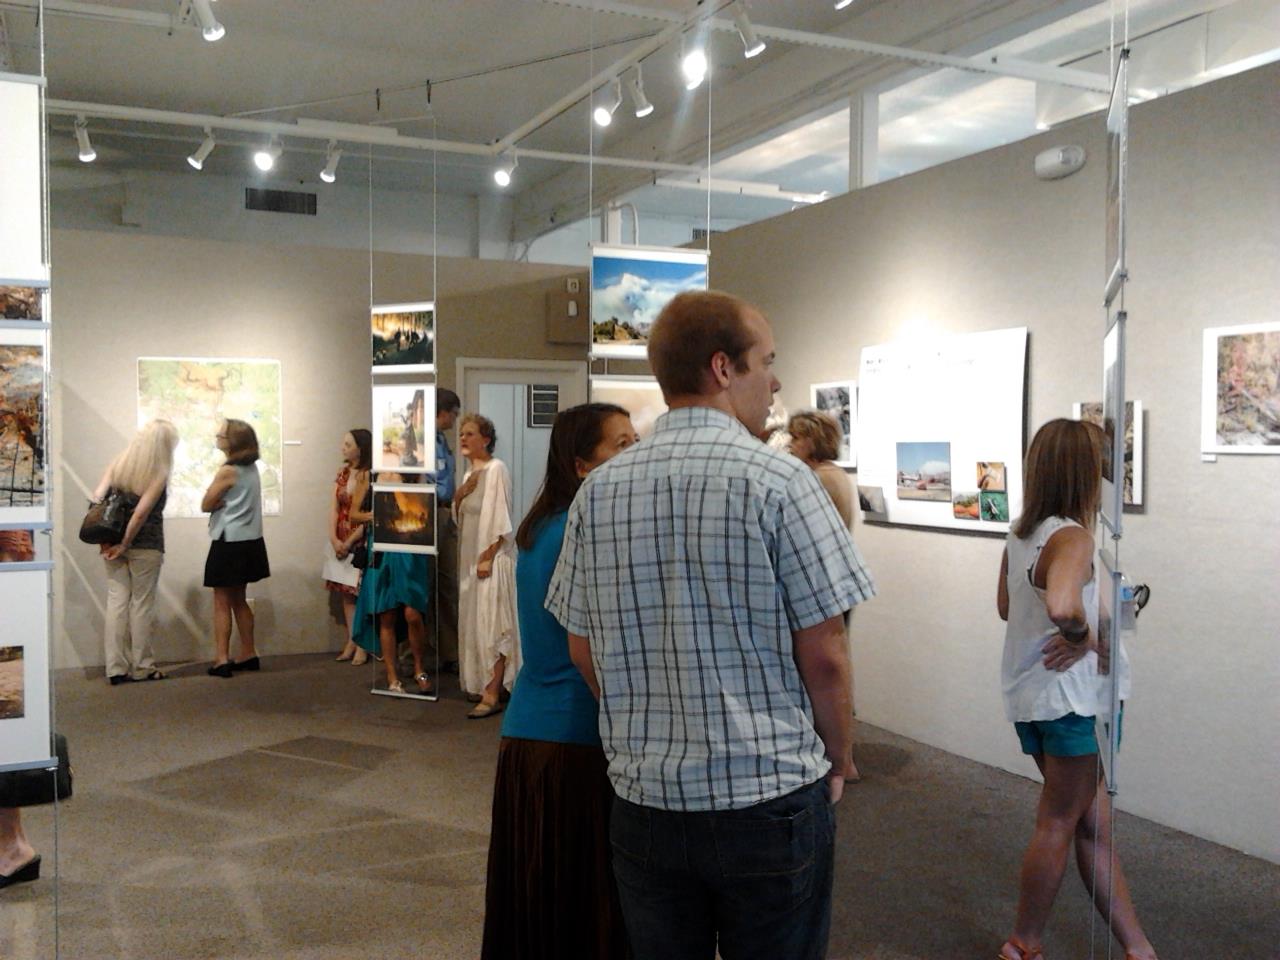 Visitors view photos, art and information about the Slide Fire in Oak Creek Canyon